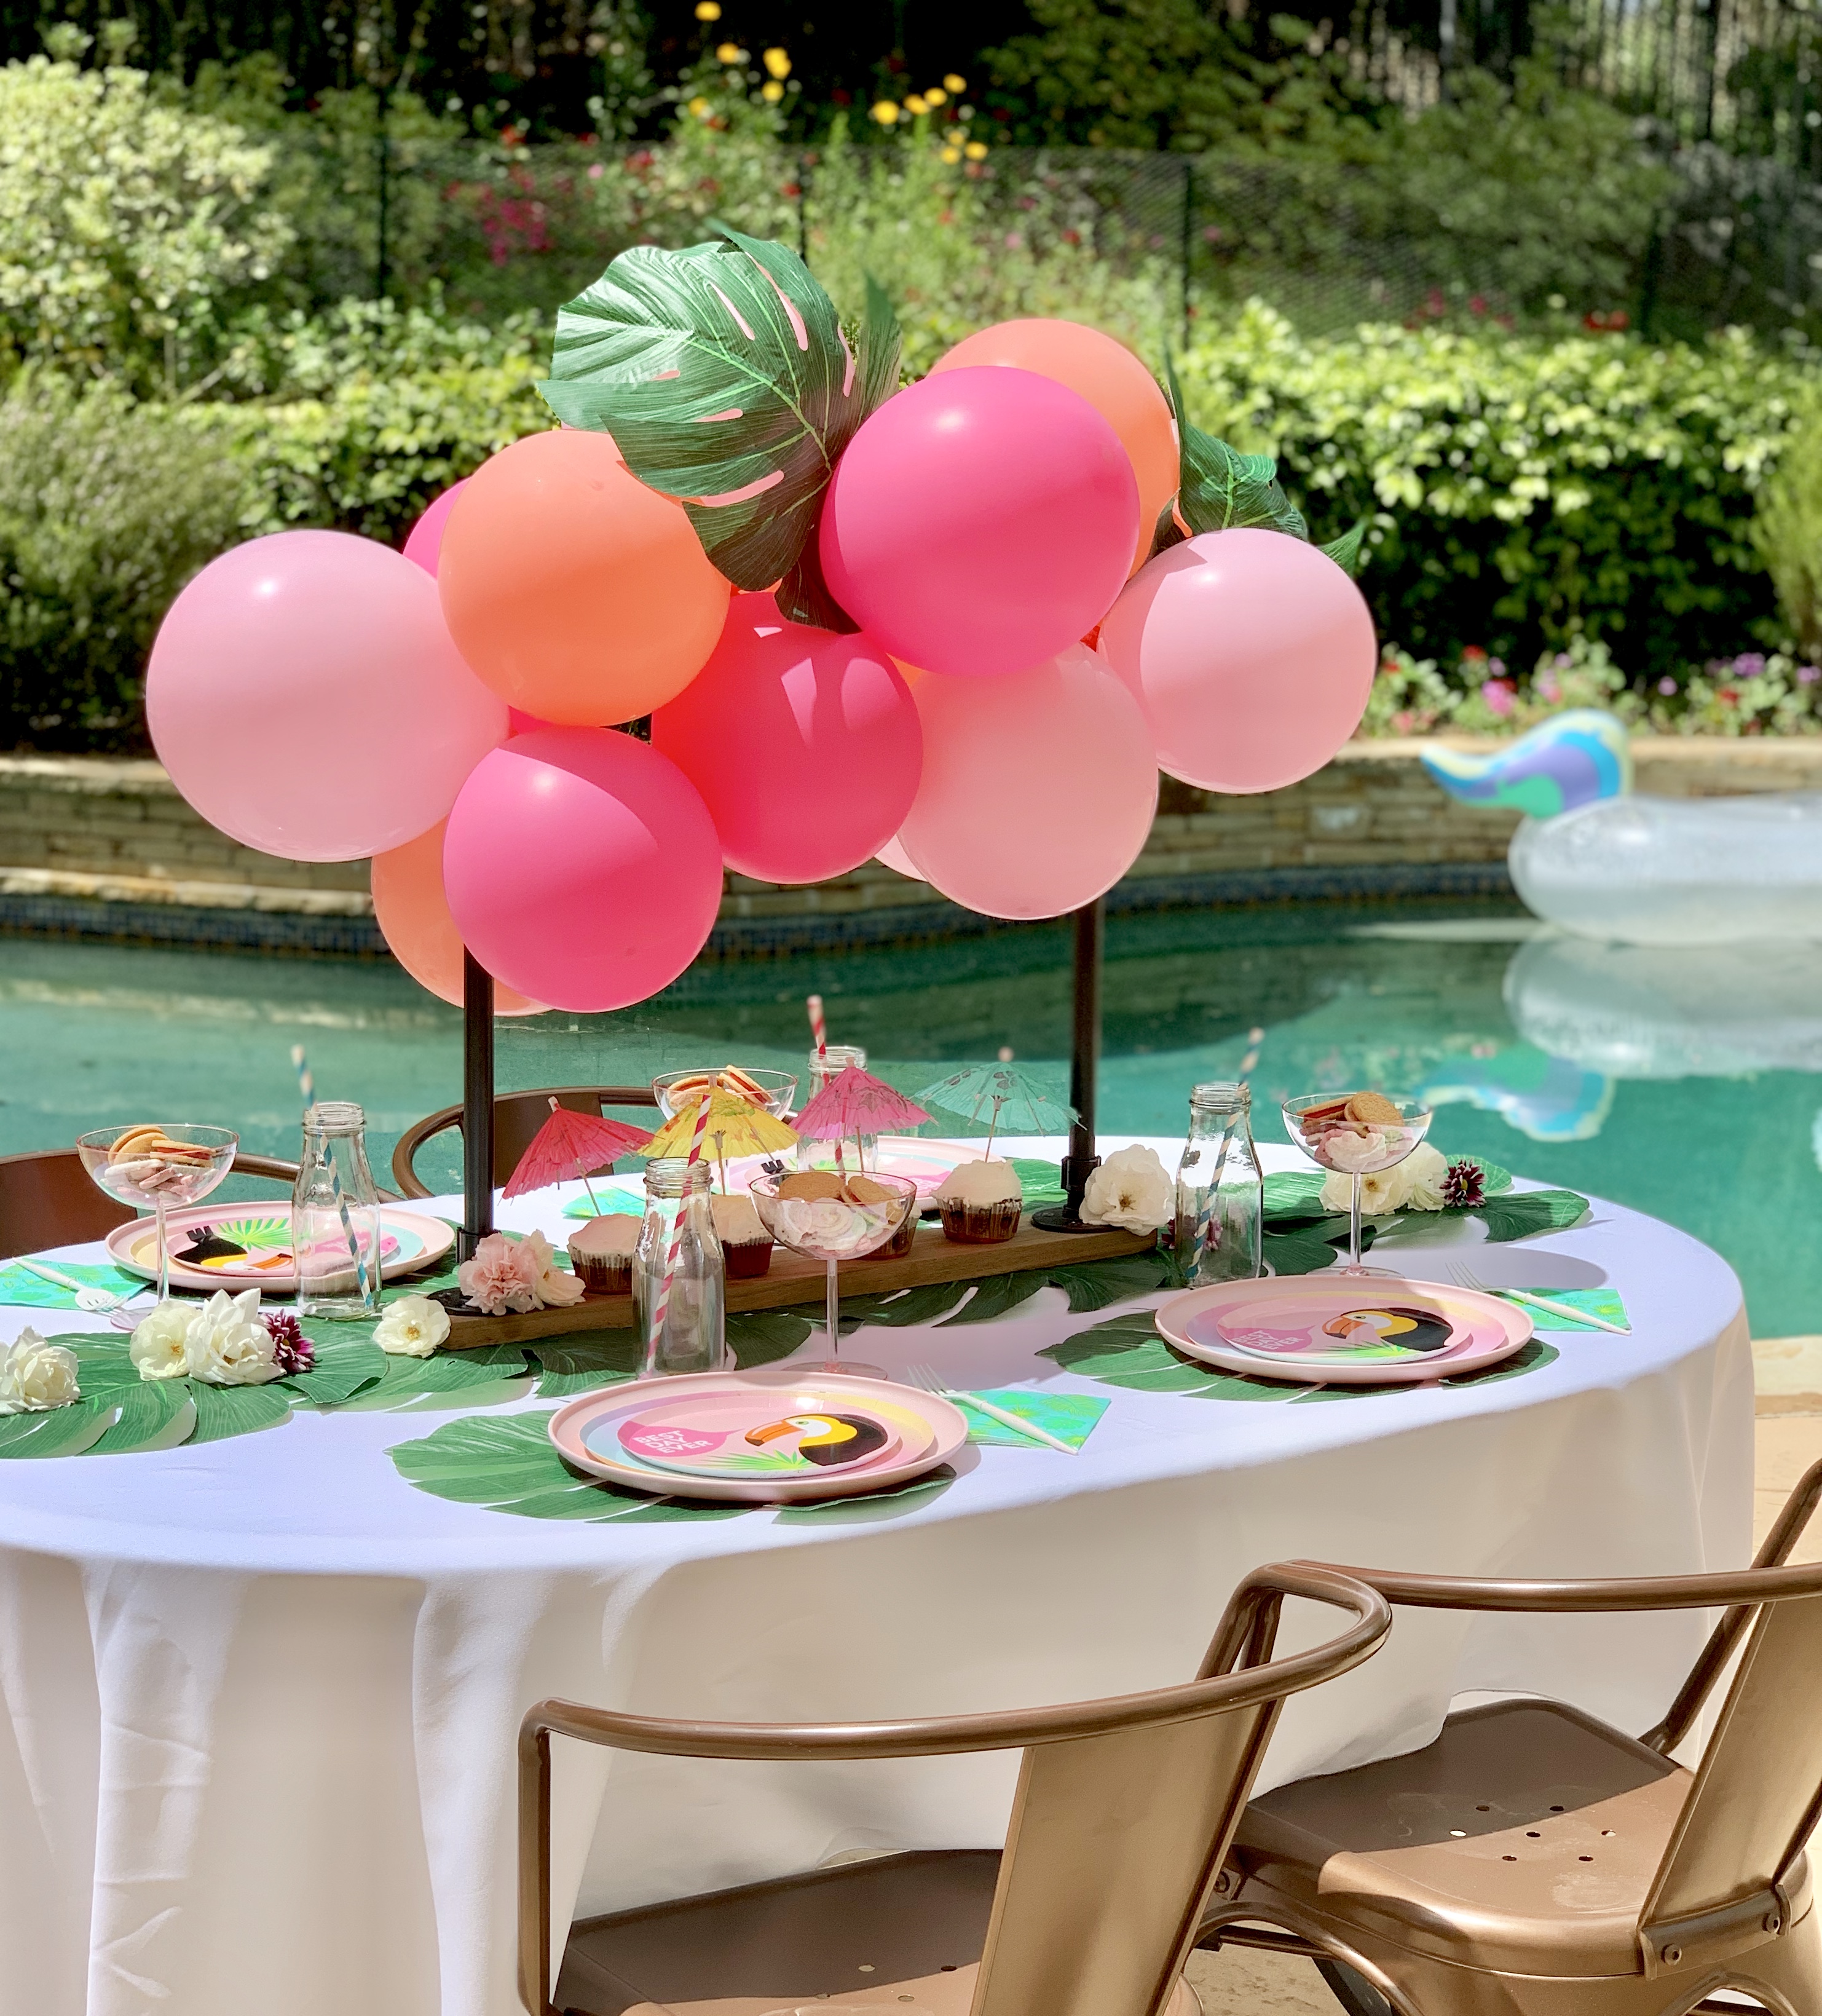 Kids Party Table Setting Photos, Images and Pictures